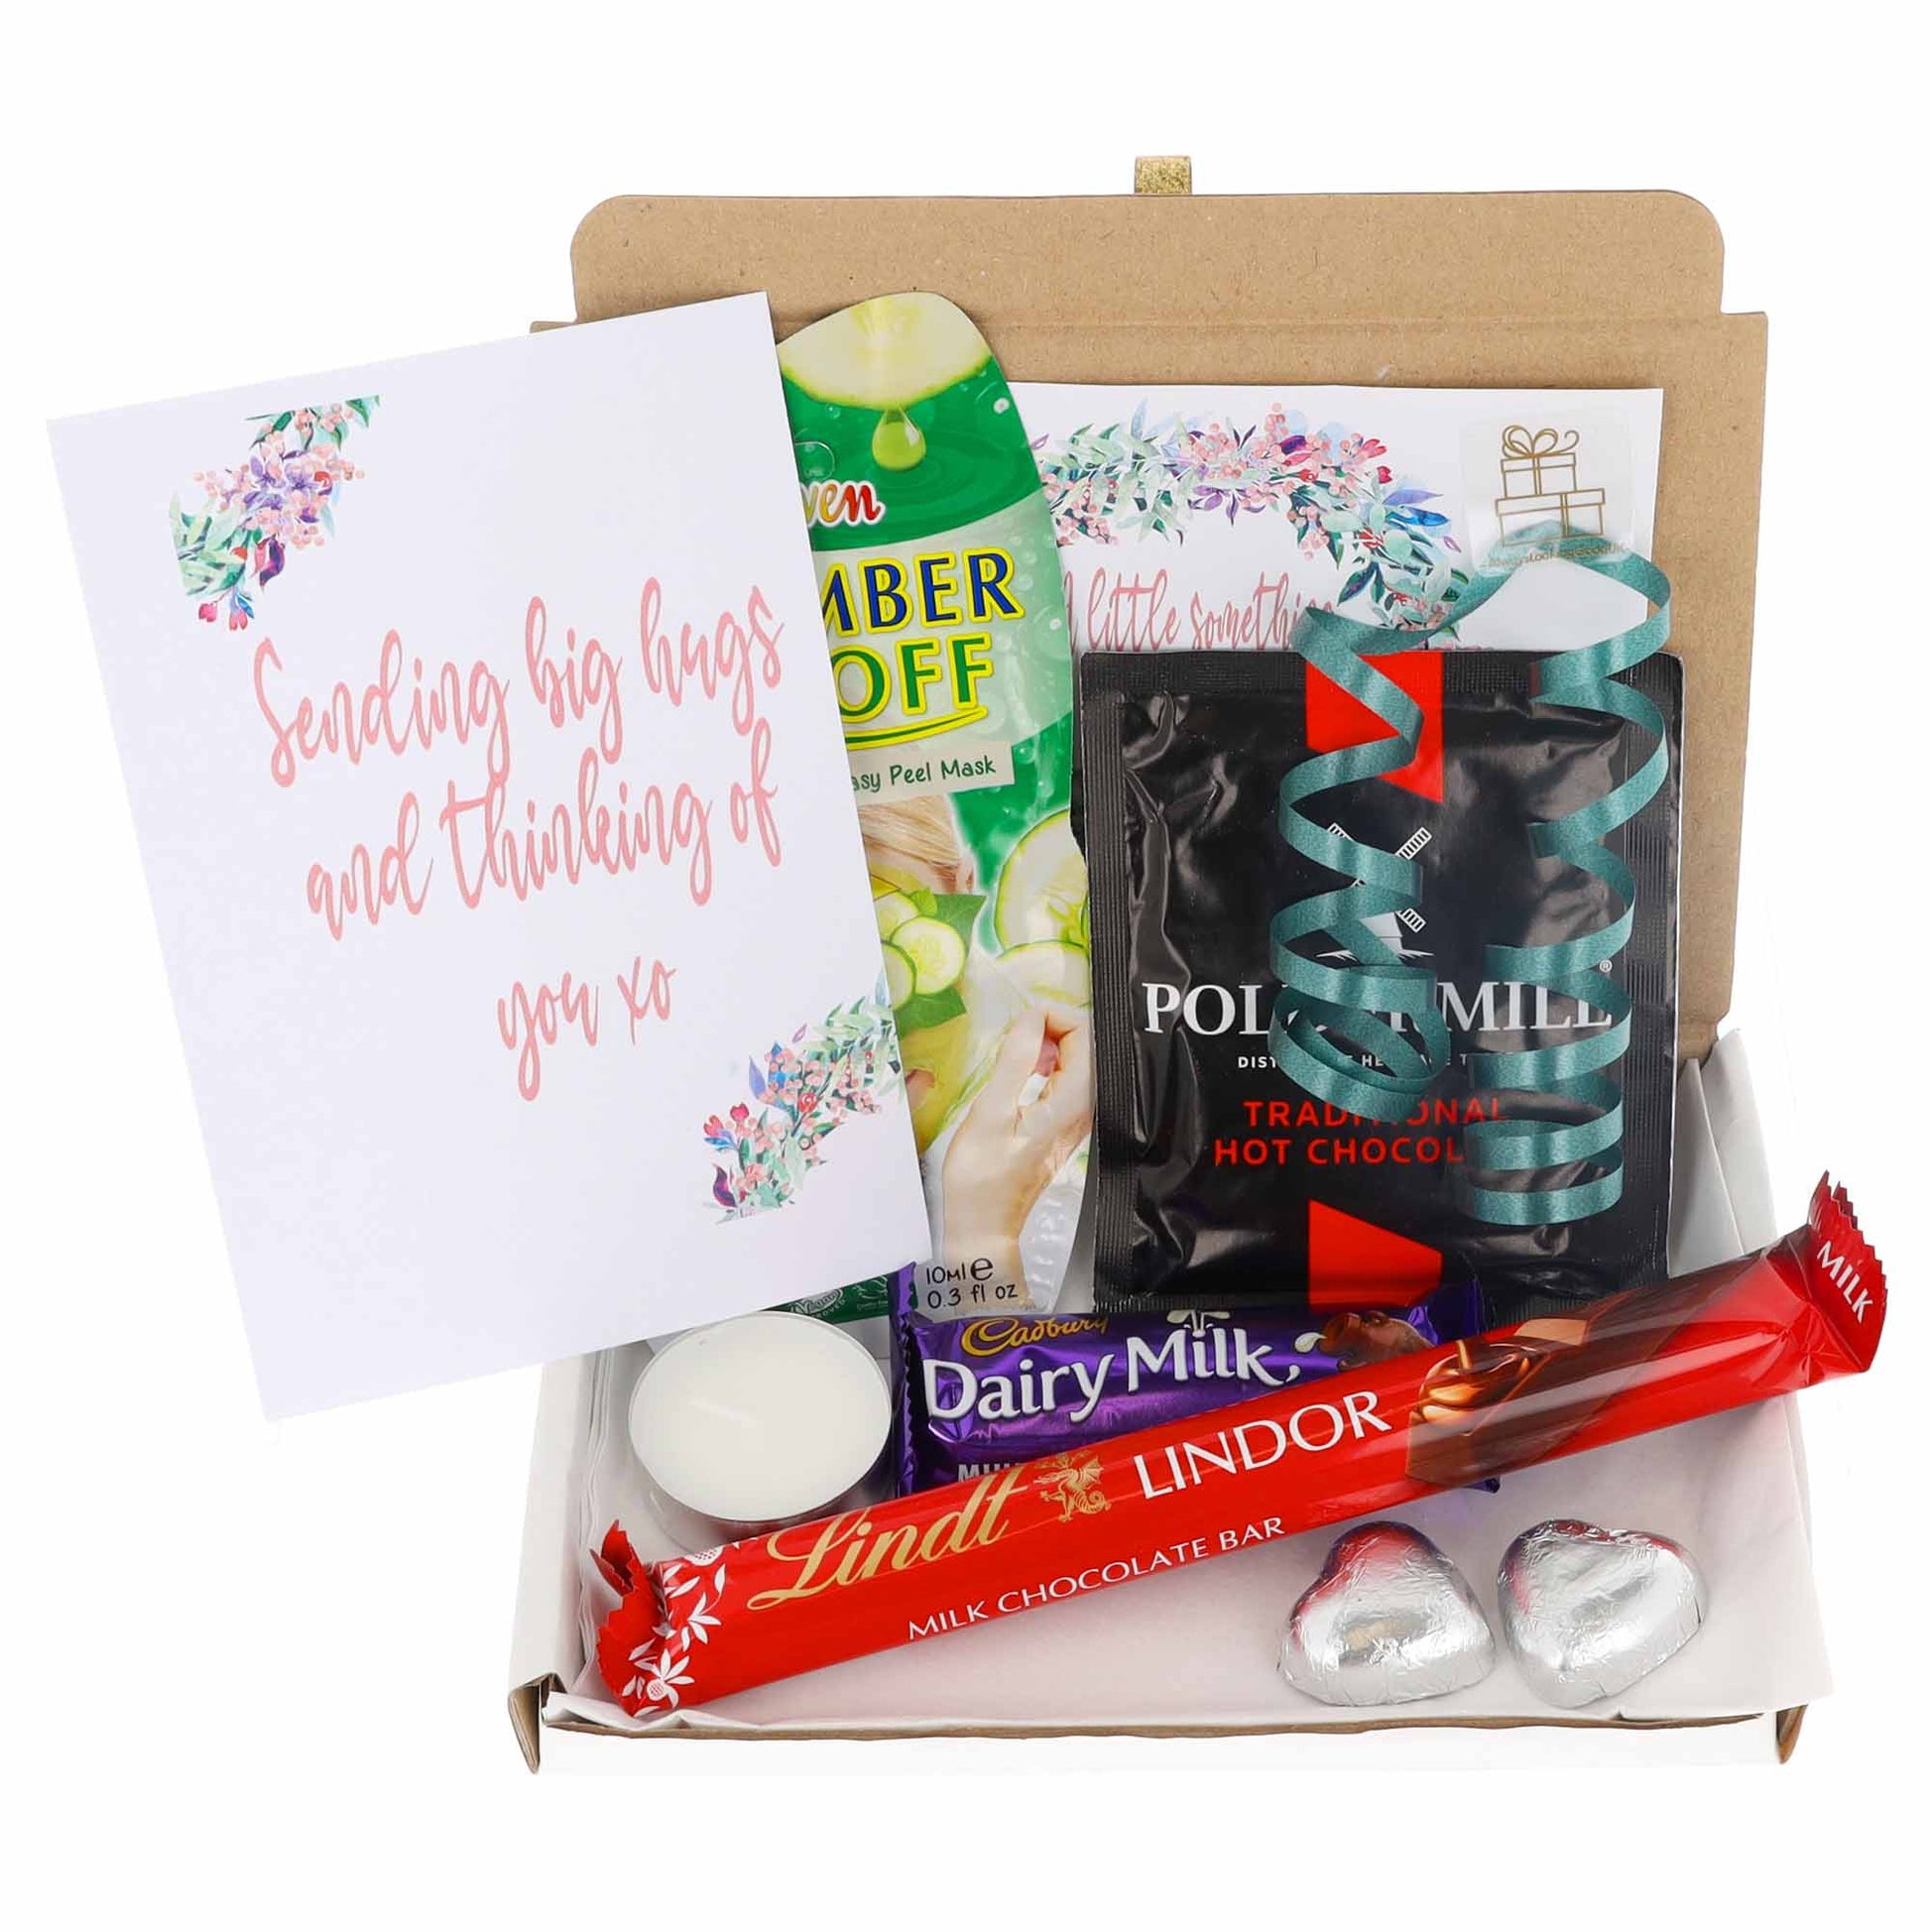 Chocolate Lover & Beauty Pamper Letterbox Gift Set  - Always Looking Good - Small  